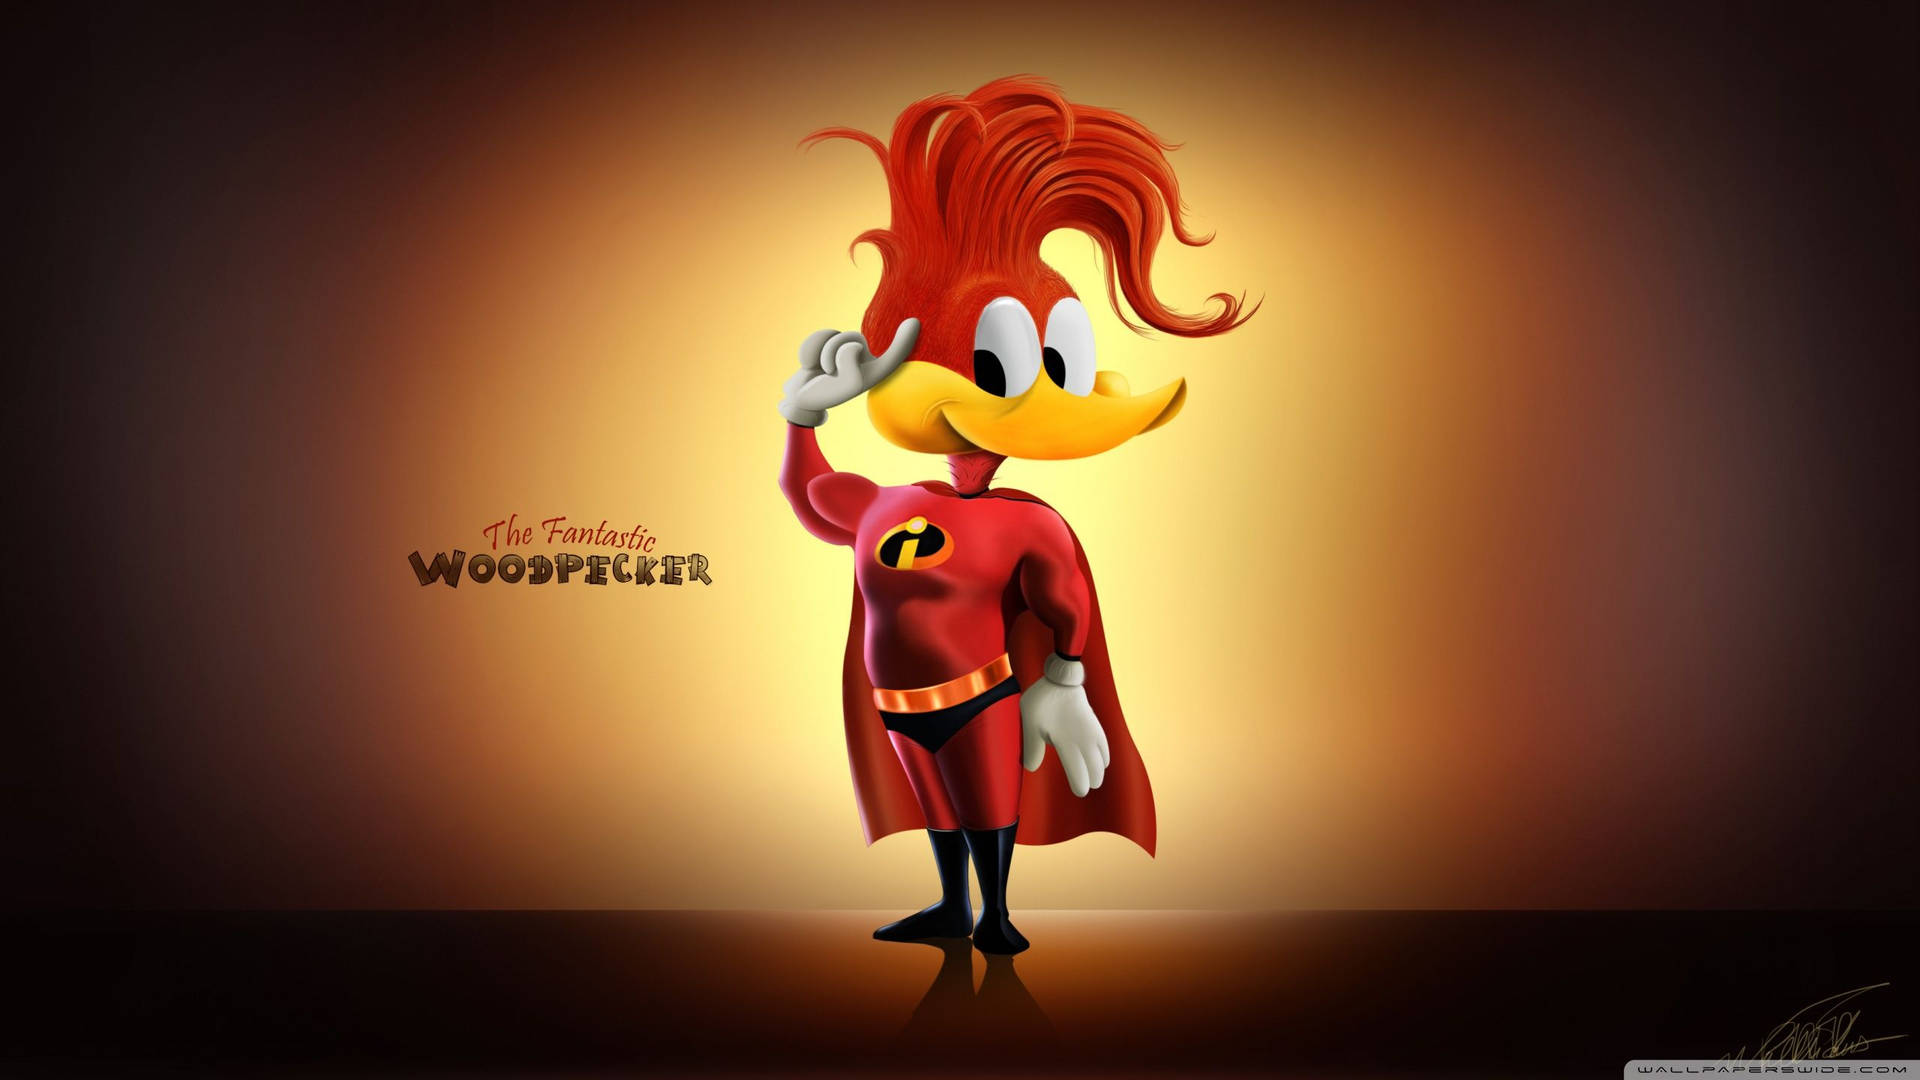 Get ready for some mischief and hijinks with Woody Woodpecker! Wallpaper